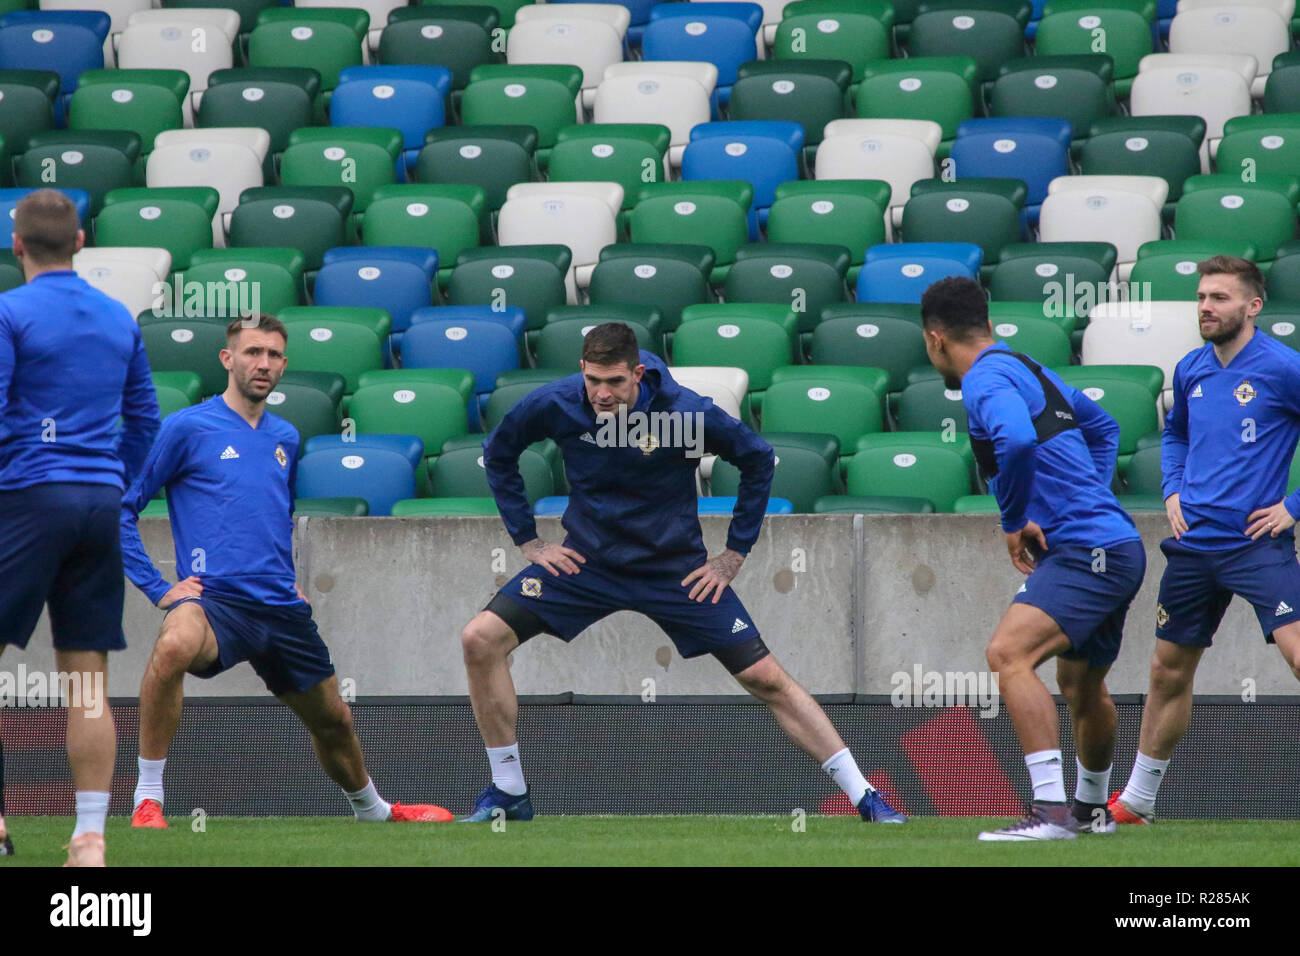 Windsor Park, Belfast, Northern Ireland.17 November 2018. Northern Ireland training in Belfast this morning ahead of their UEFA Nations League game against Austria tomorrow night in the stadium. Kyle Lafferty (centre). Credit: David Hunter/Alamy Live News. Stock Photo